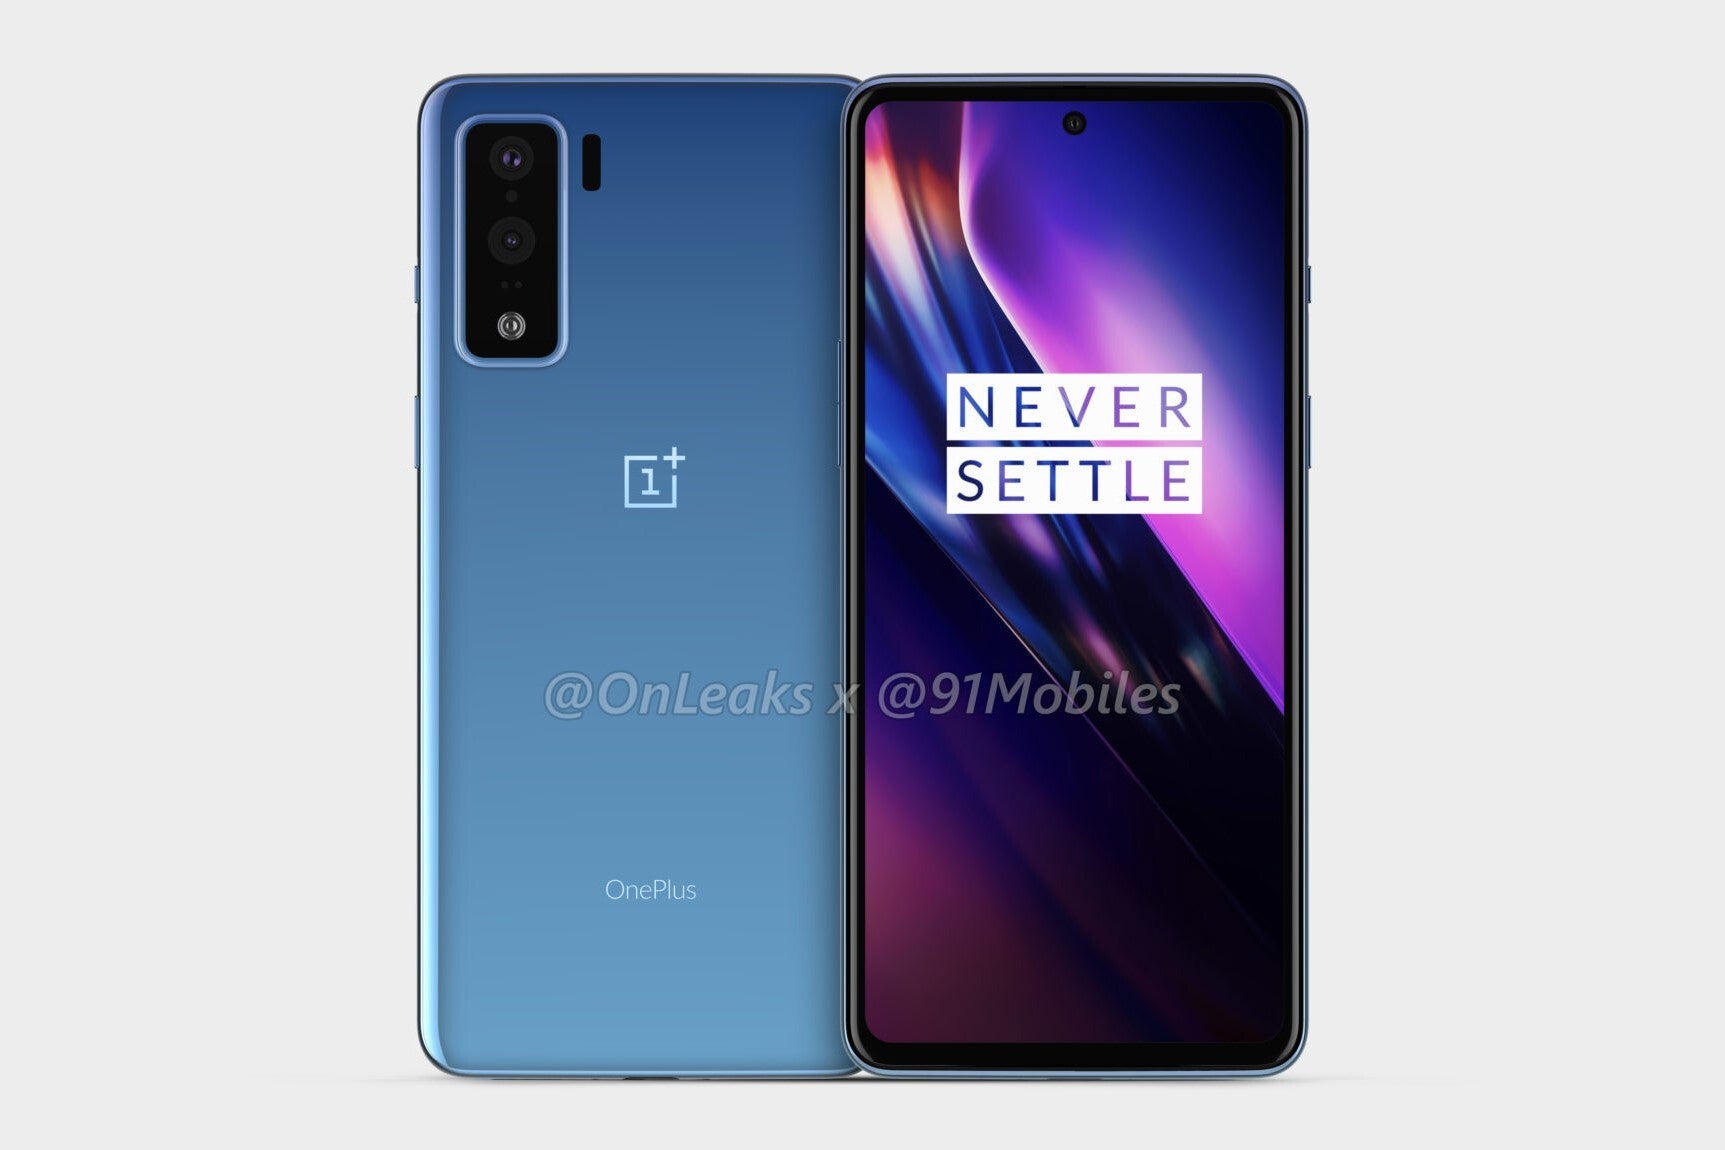 Early OnePlus Z CAD-based render - The mid-range OnePlus Z 5G will likely be announced in July